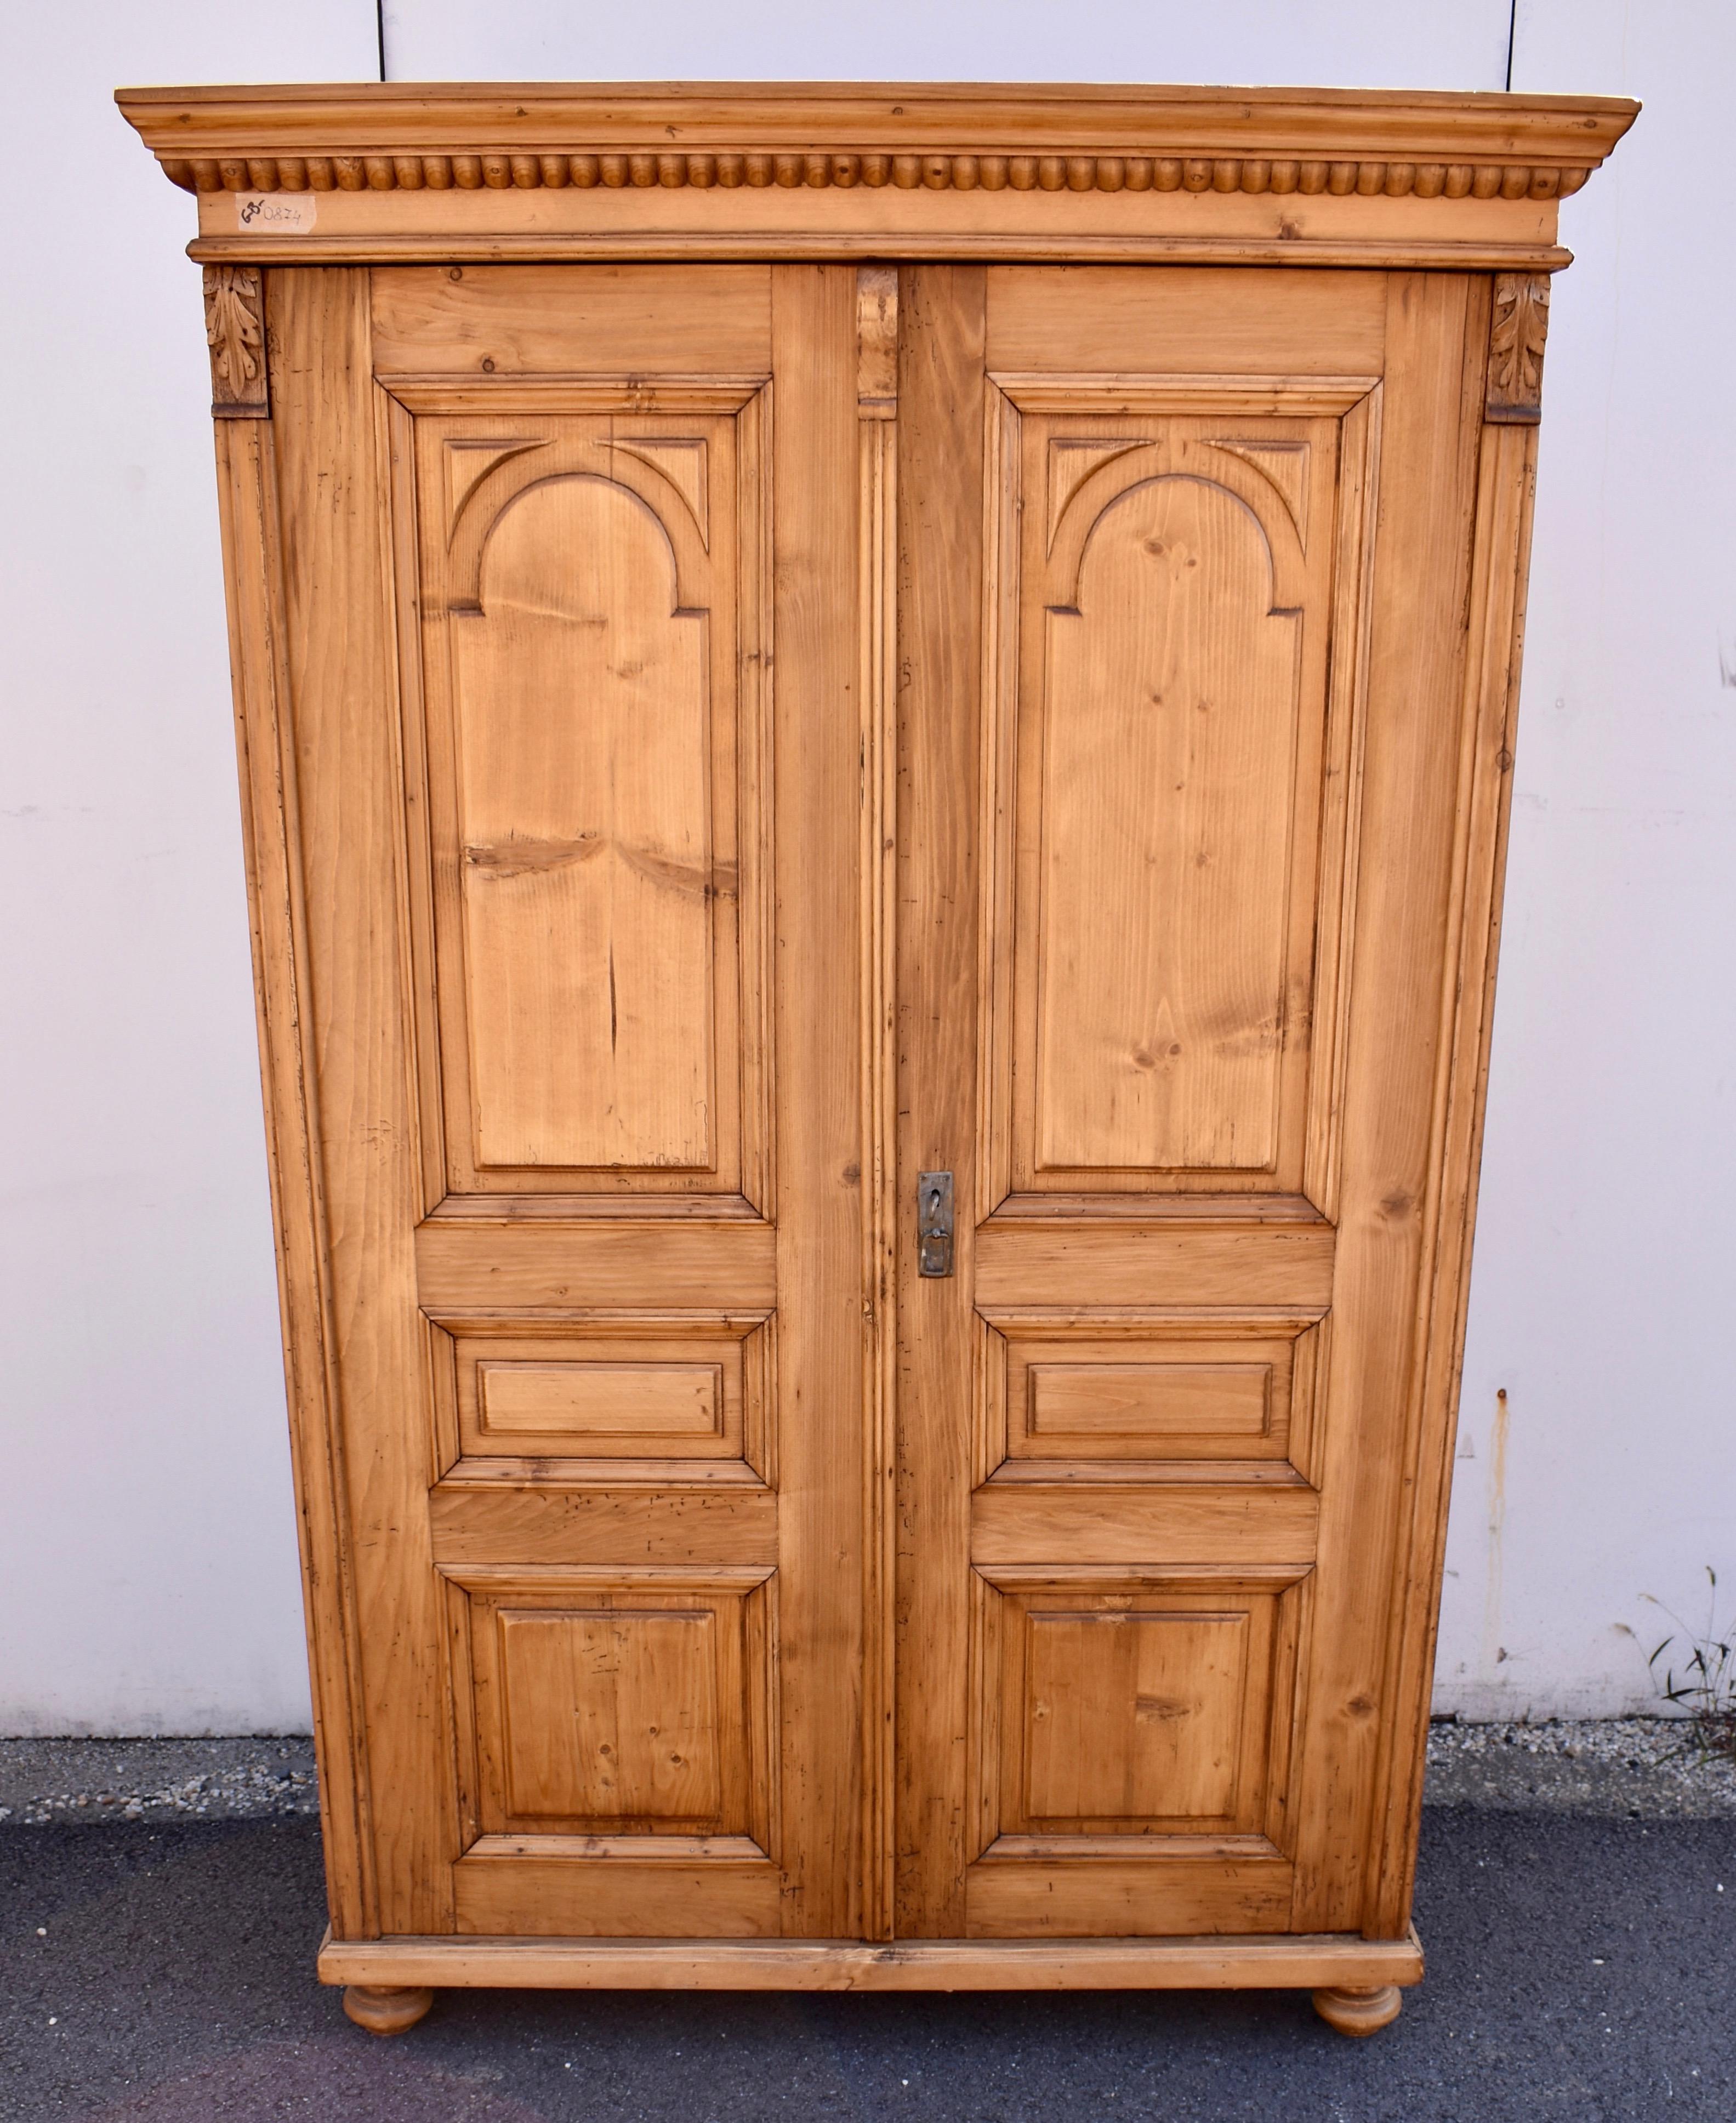 This compact little armoire has a lot going on.  The ogee crown molding is bold and attractive and has a strip of large bead molding beneath.  Each door has three raised panels.  The top one is arched with triangular appliqués in the upper corners;